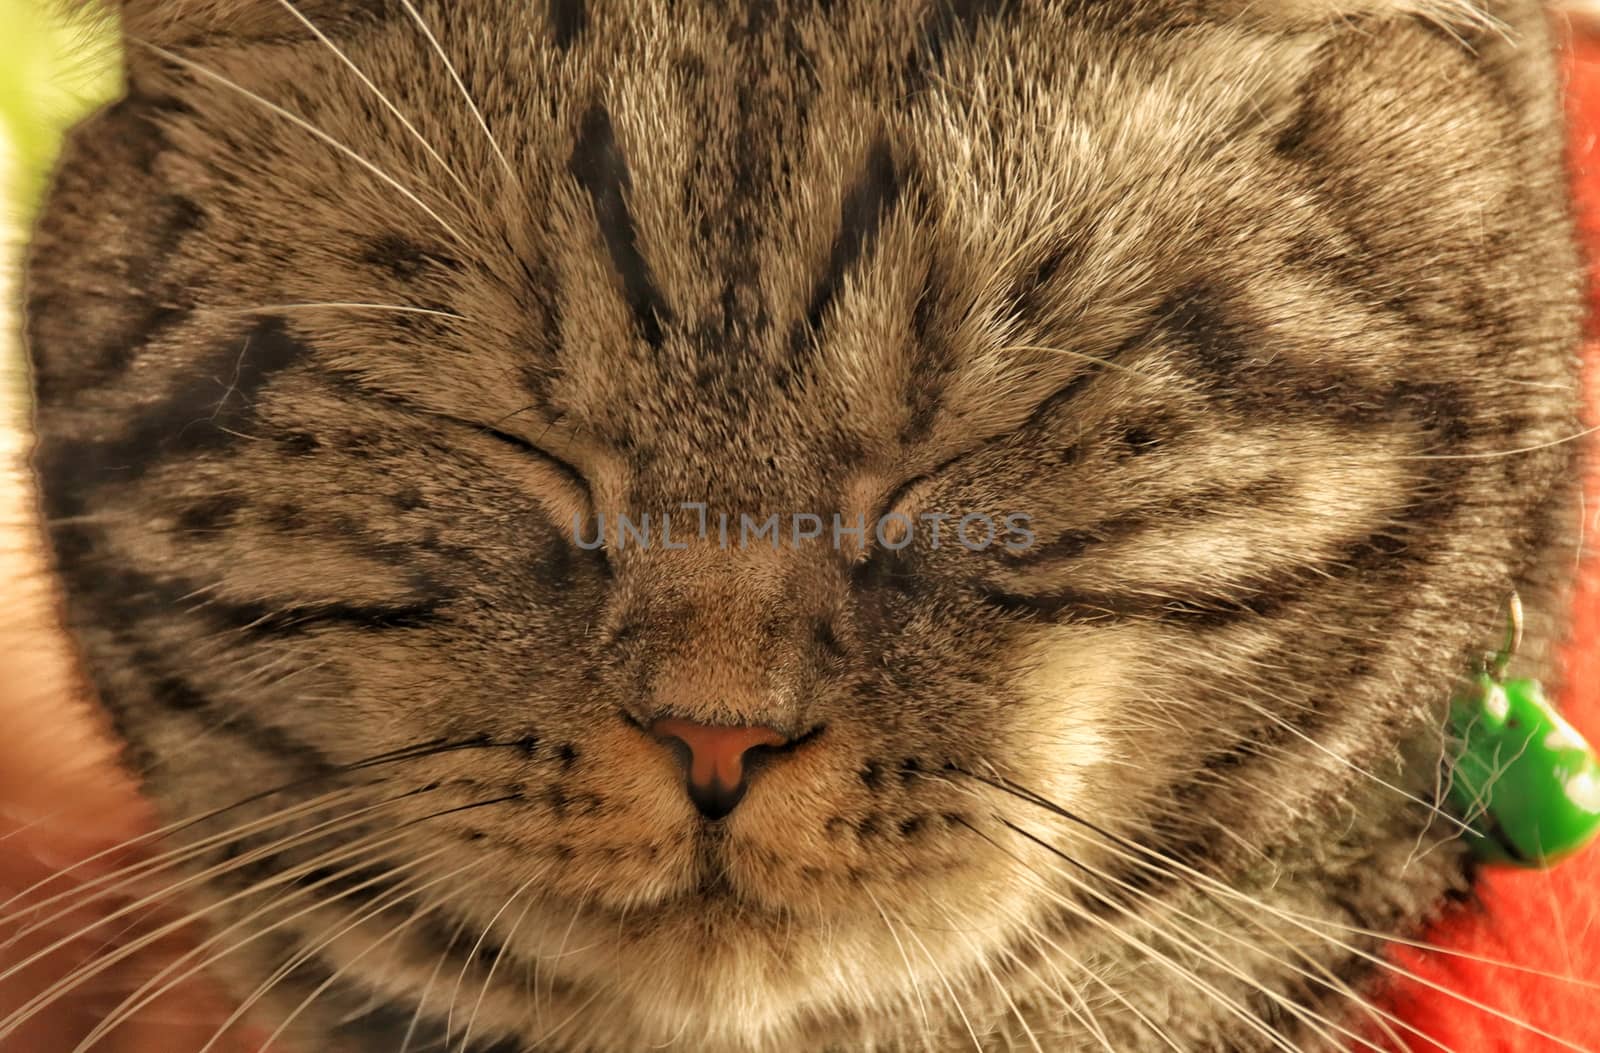 Close up of an angry looking tabby cat that shows the concept of the struggles of imposed home quarantine during the covid-19 pandemic